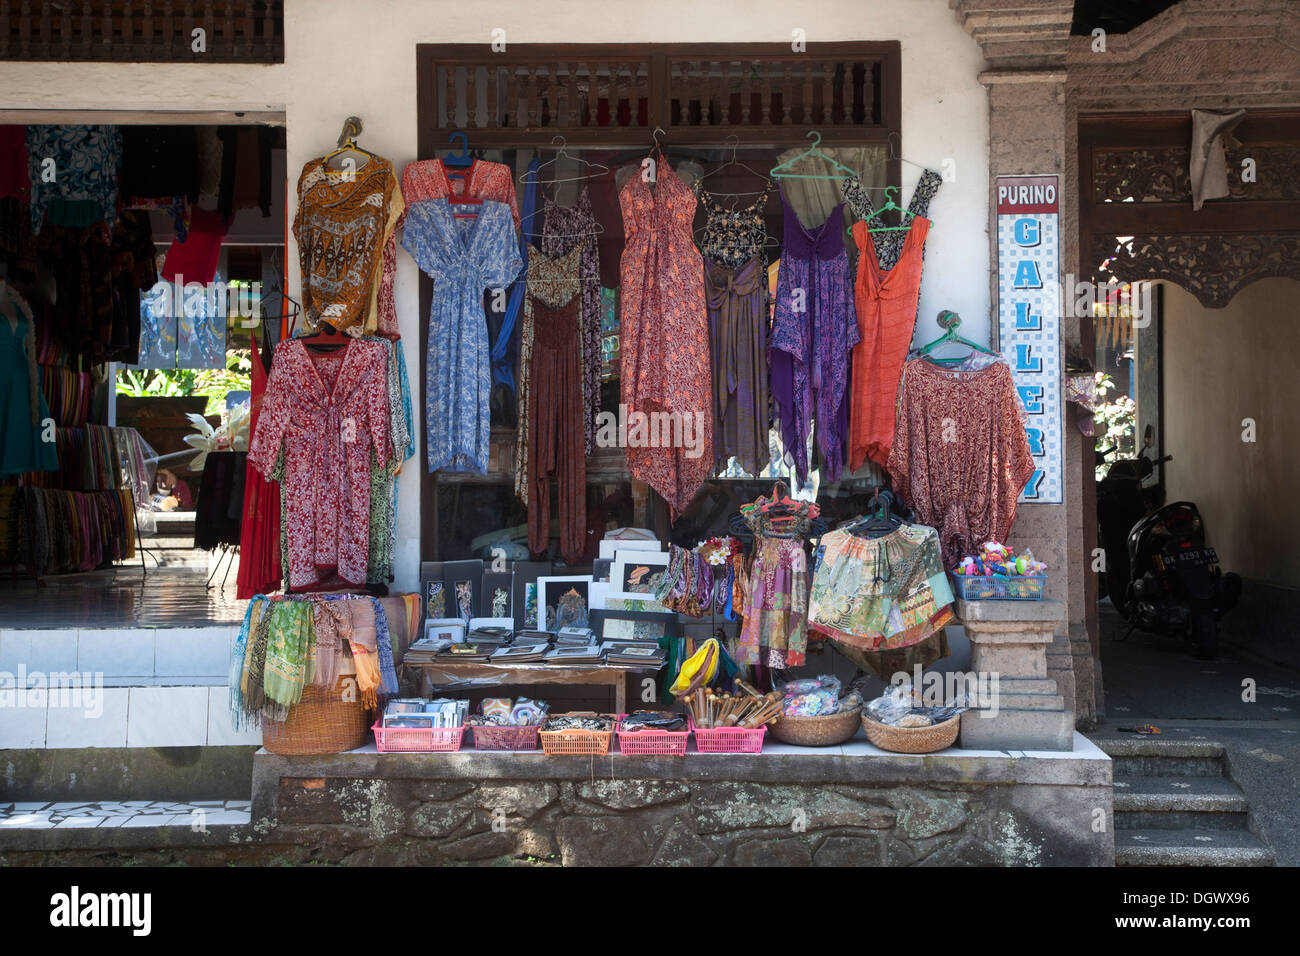 Clothes shop souvenirs gifts Ubud Bali Indonesia Asia color